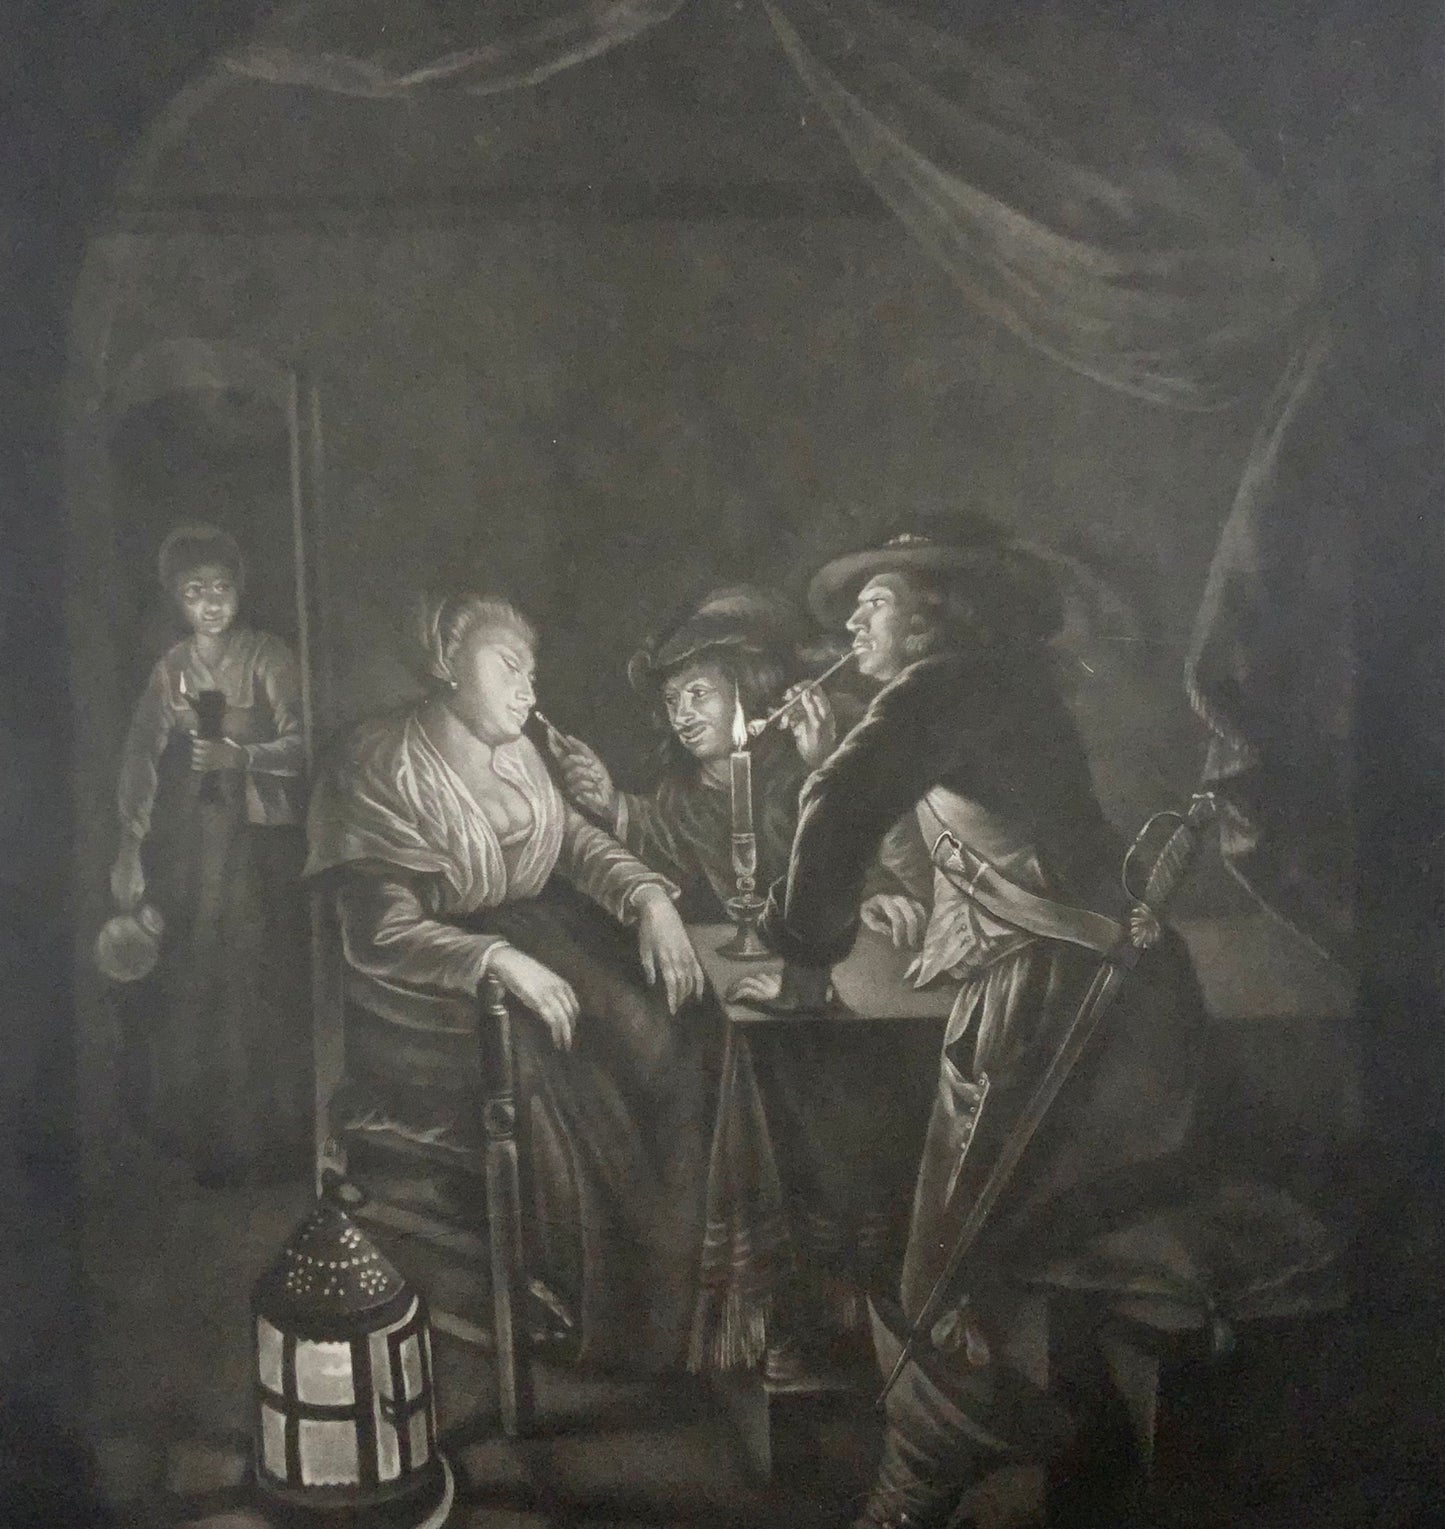 1774 Smoking by Candlelight, mezzotint by W. Baillie after Gerard Dou, genre